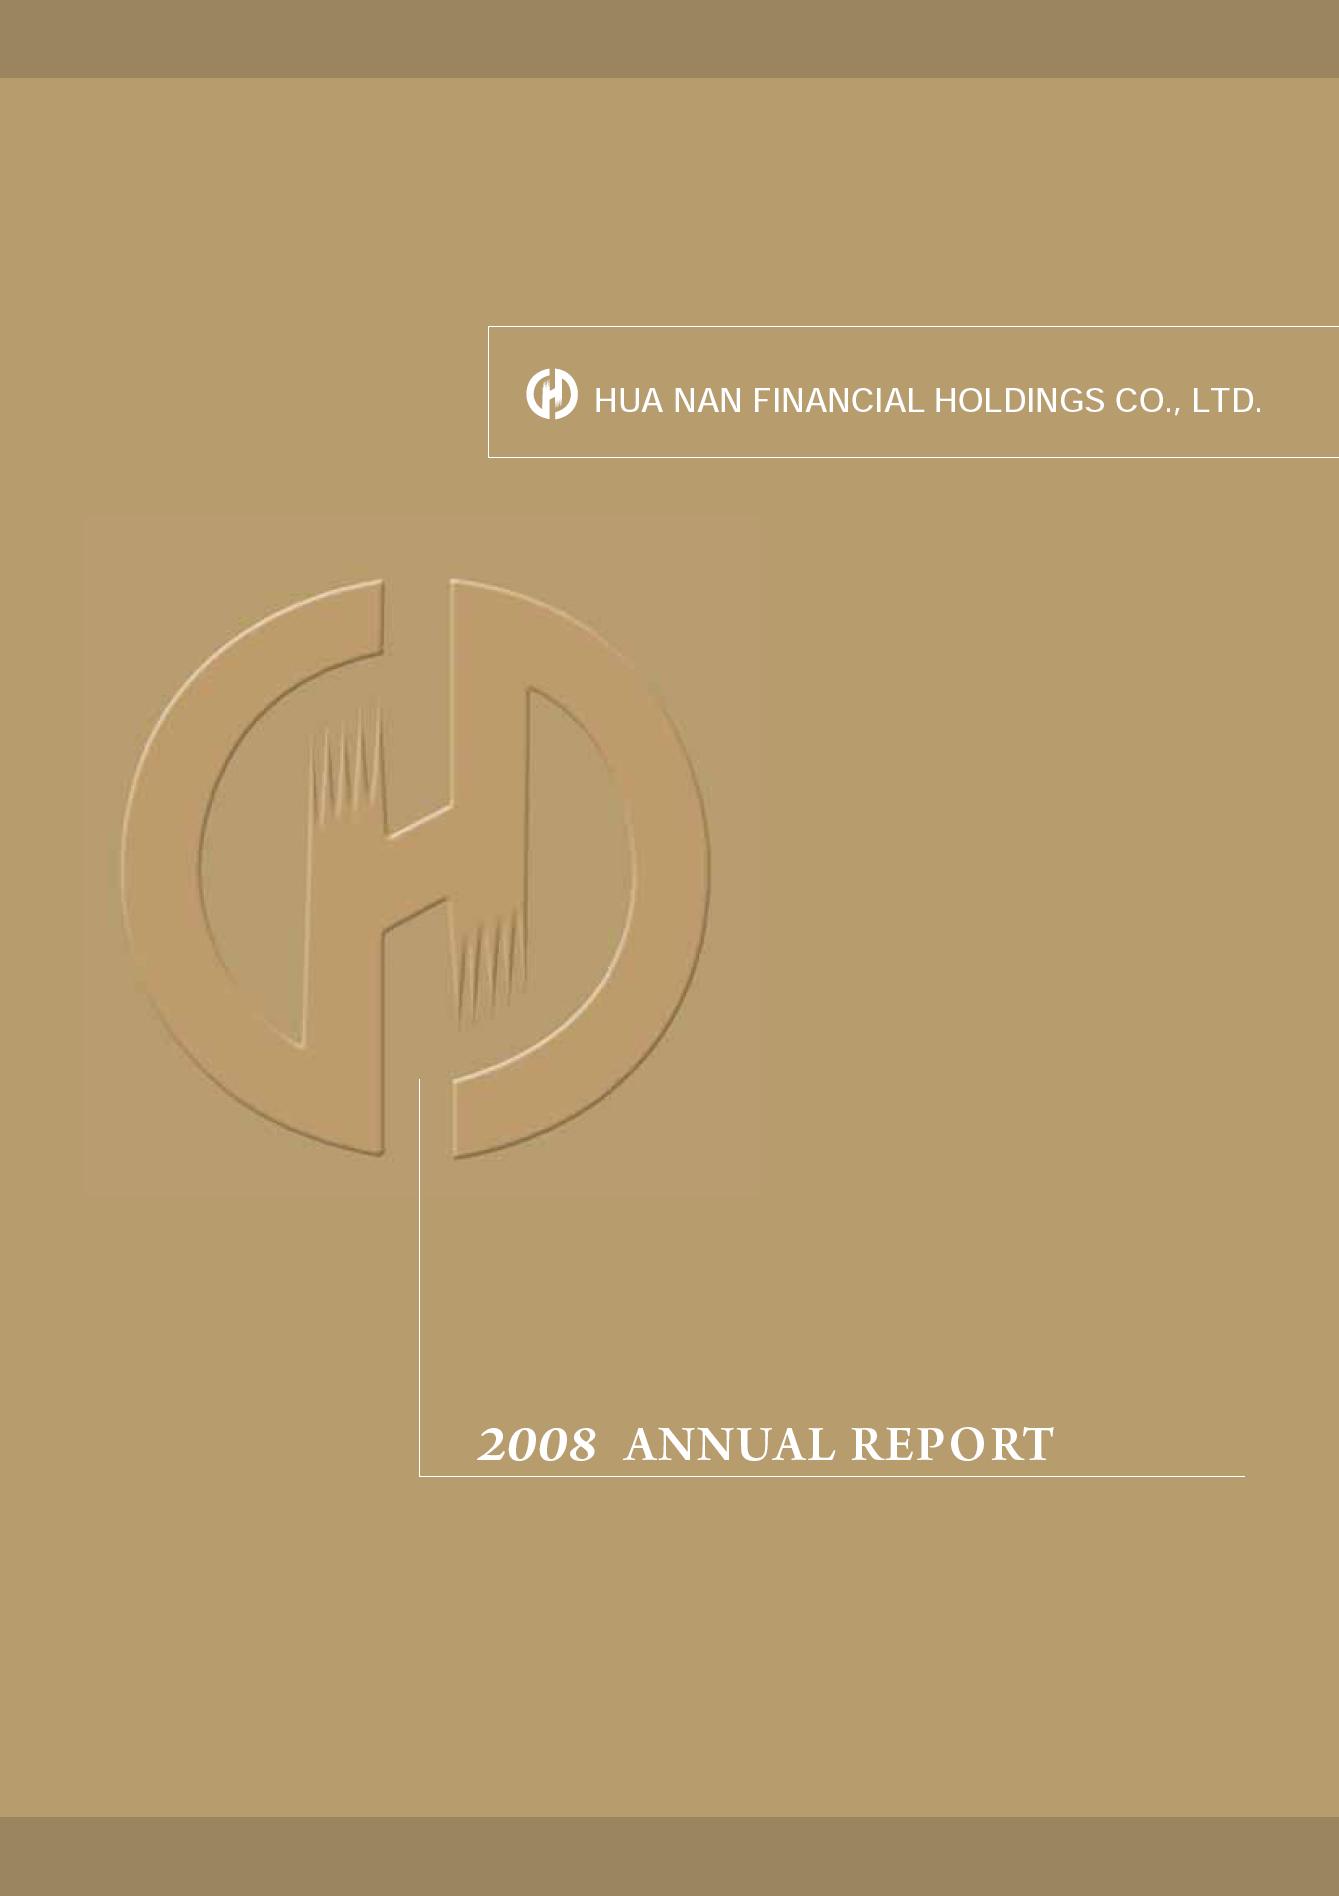 The cover of 2008 Annual Reports